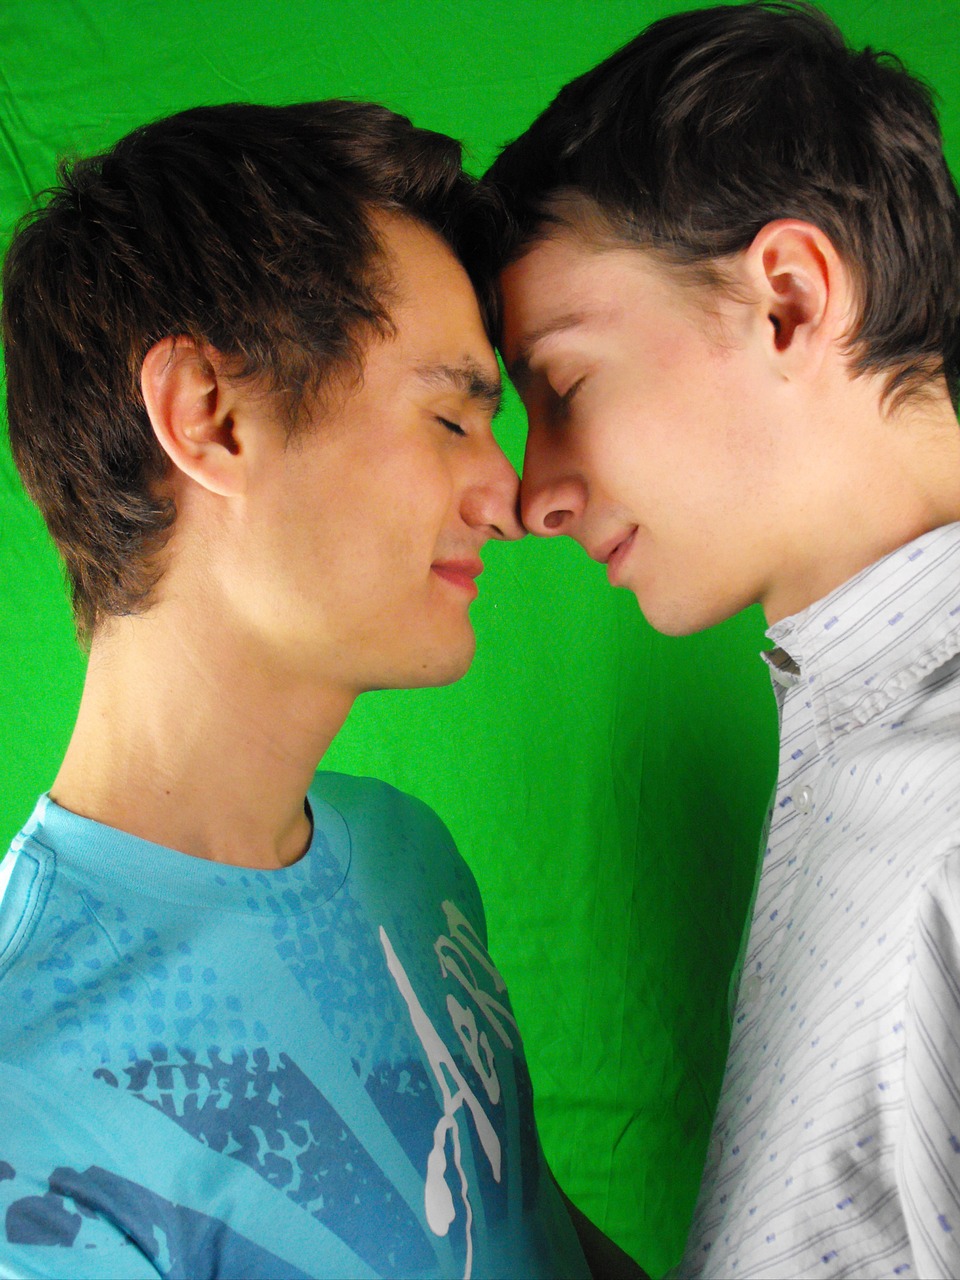 gay couple love young men free photo